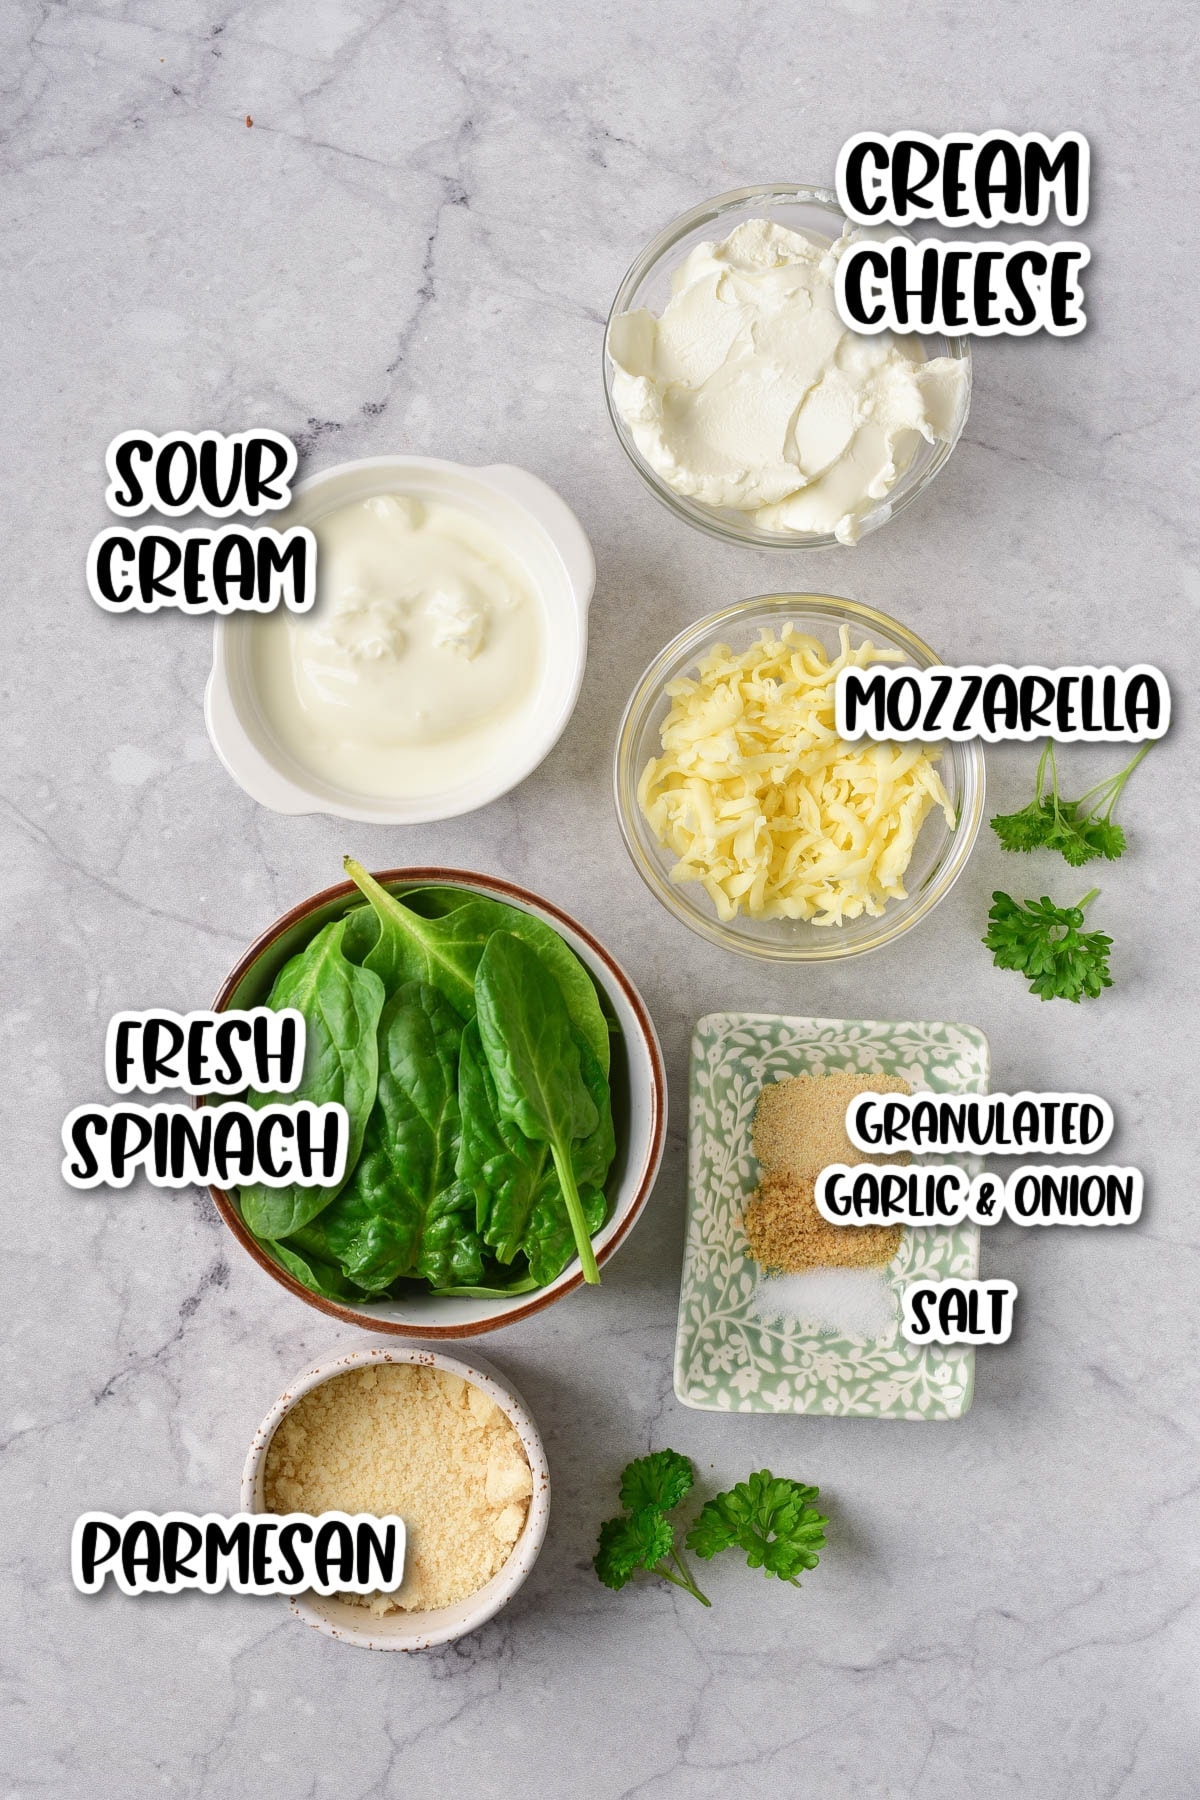 Spinach Dip Ingredients Labeled